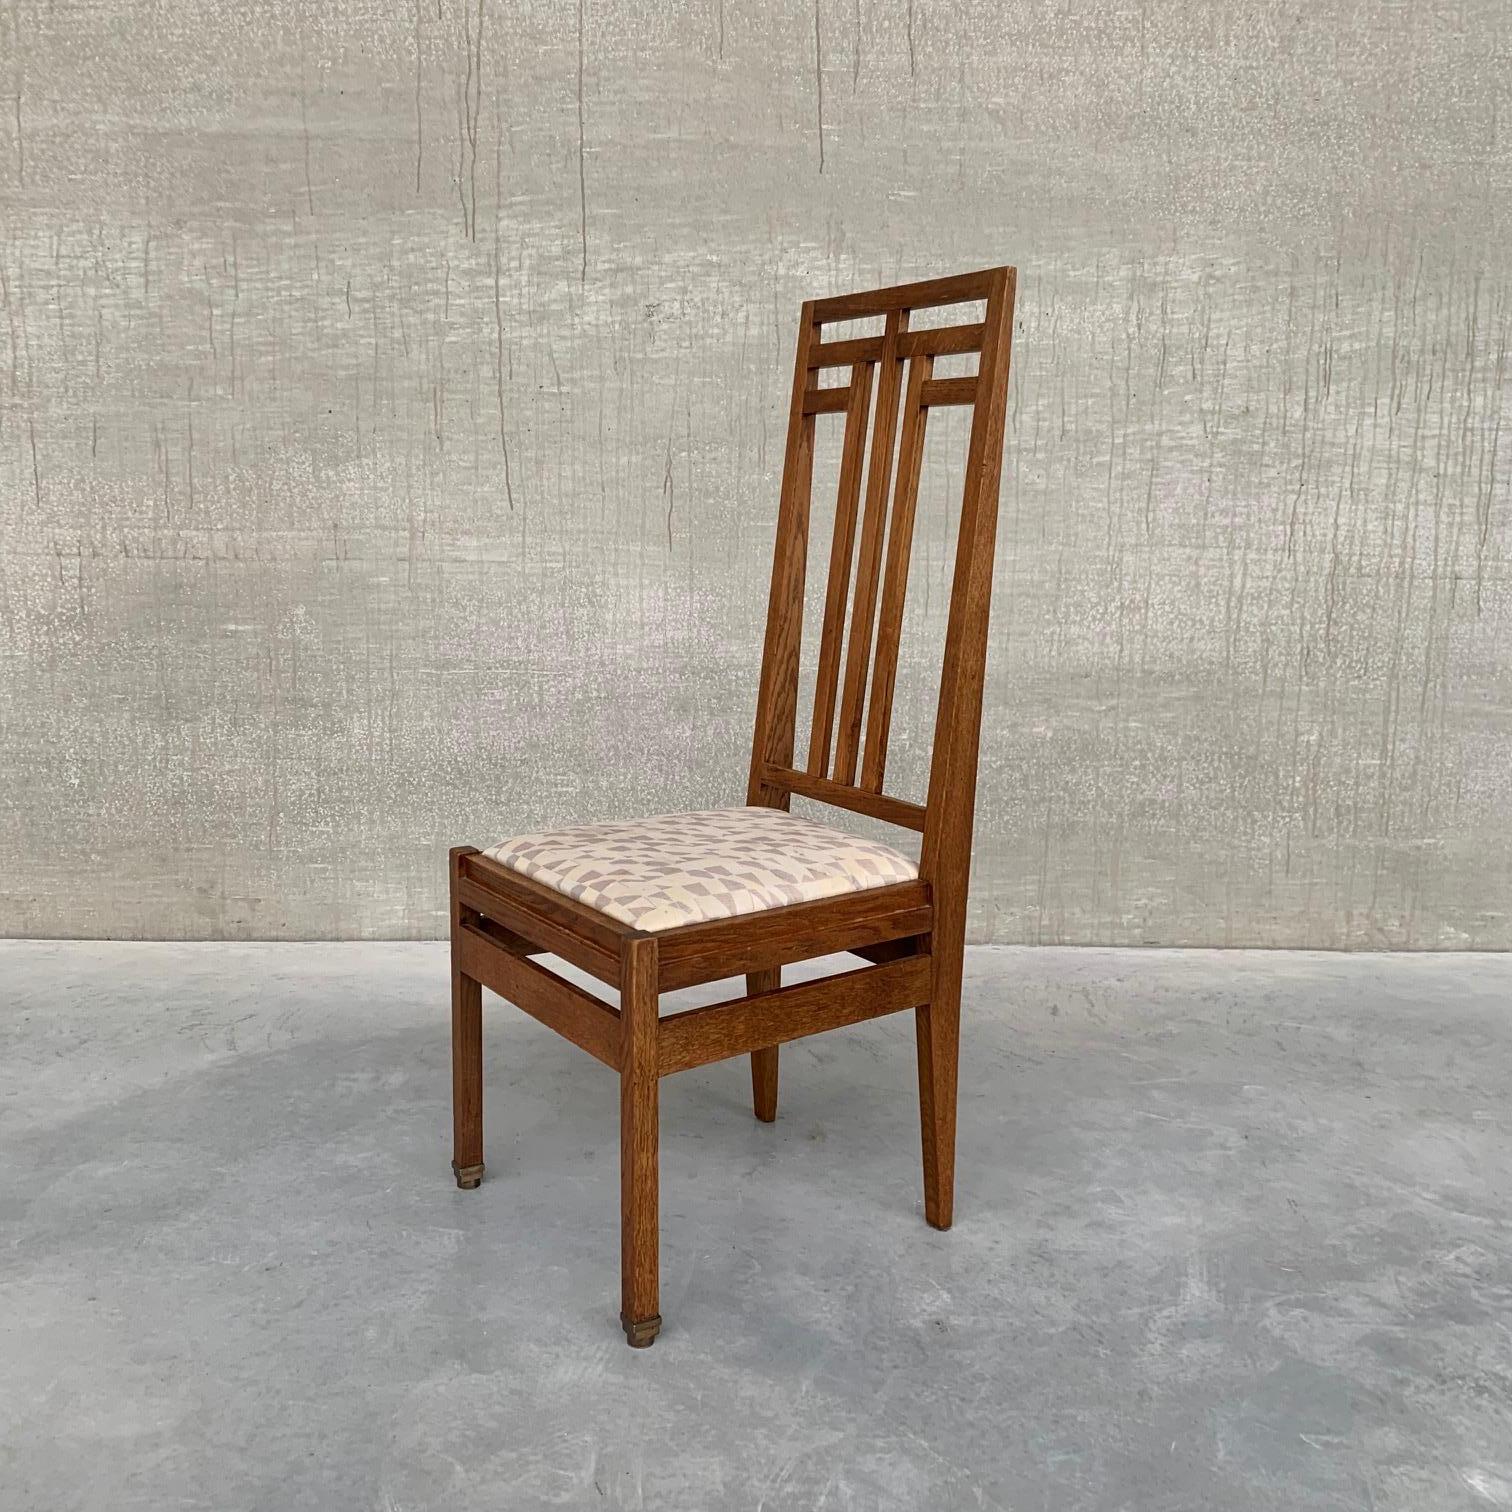 A scarce set of dining chairs by accomplished Hague School designer Cornelis Van Der
Sluys.
The Haagse School or Hague School form of living was developed in The Hague from 1925
to 1940 and appealed to wealthy inhabitants of the city for their